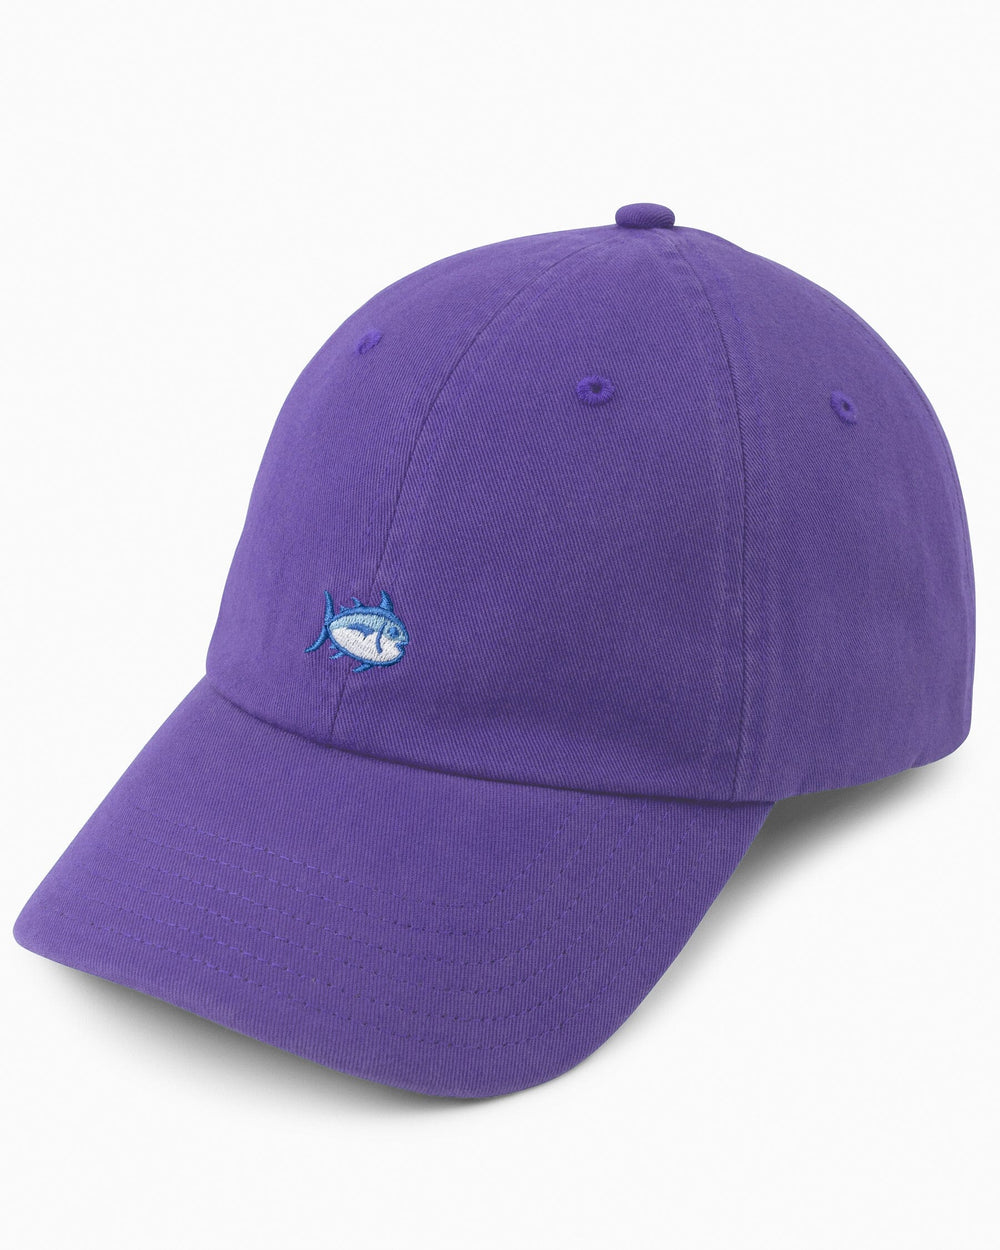 The front view of the Team Colors Skipjack Hat by Southern Tide - Regal Purple